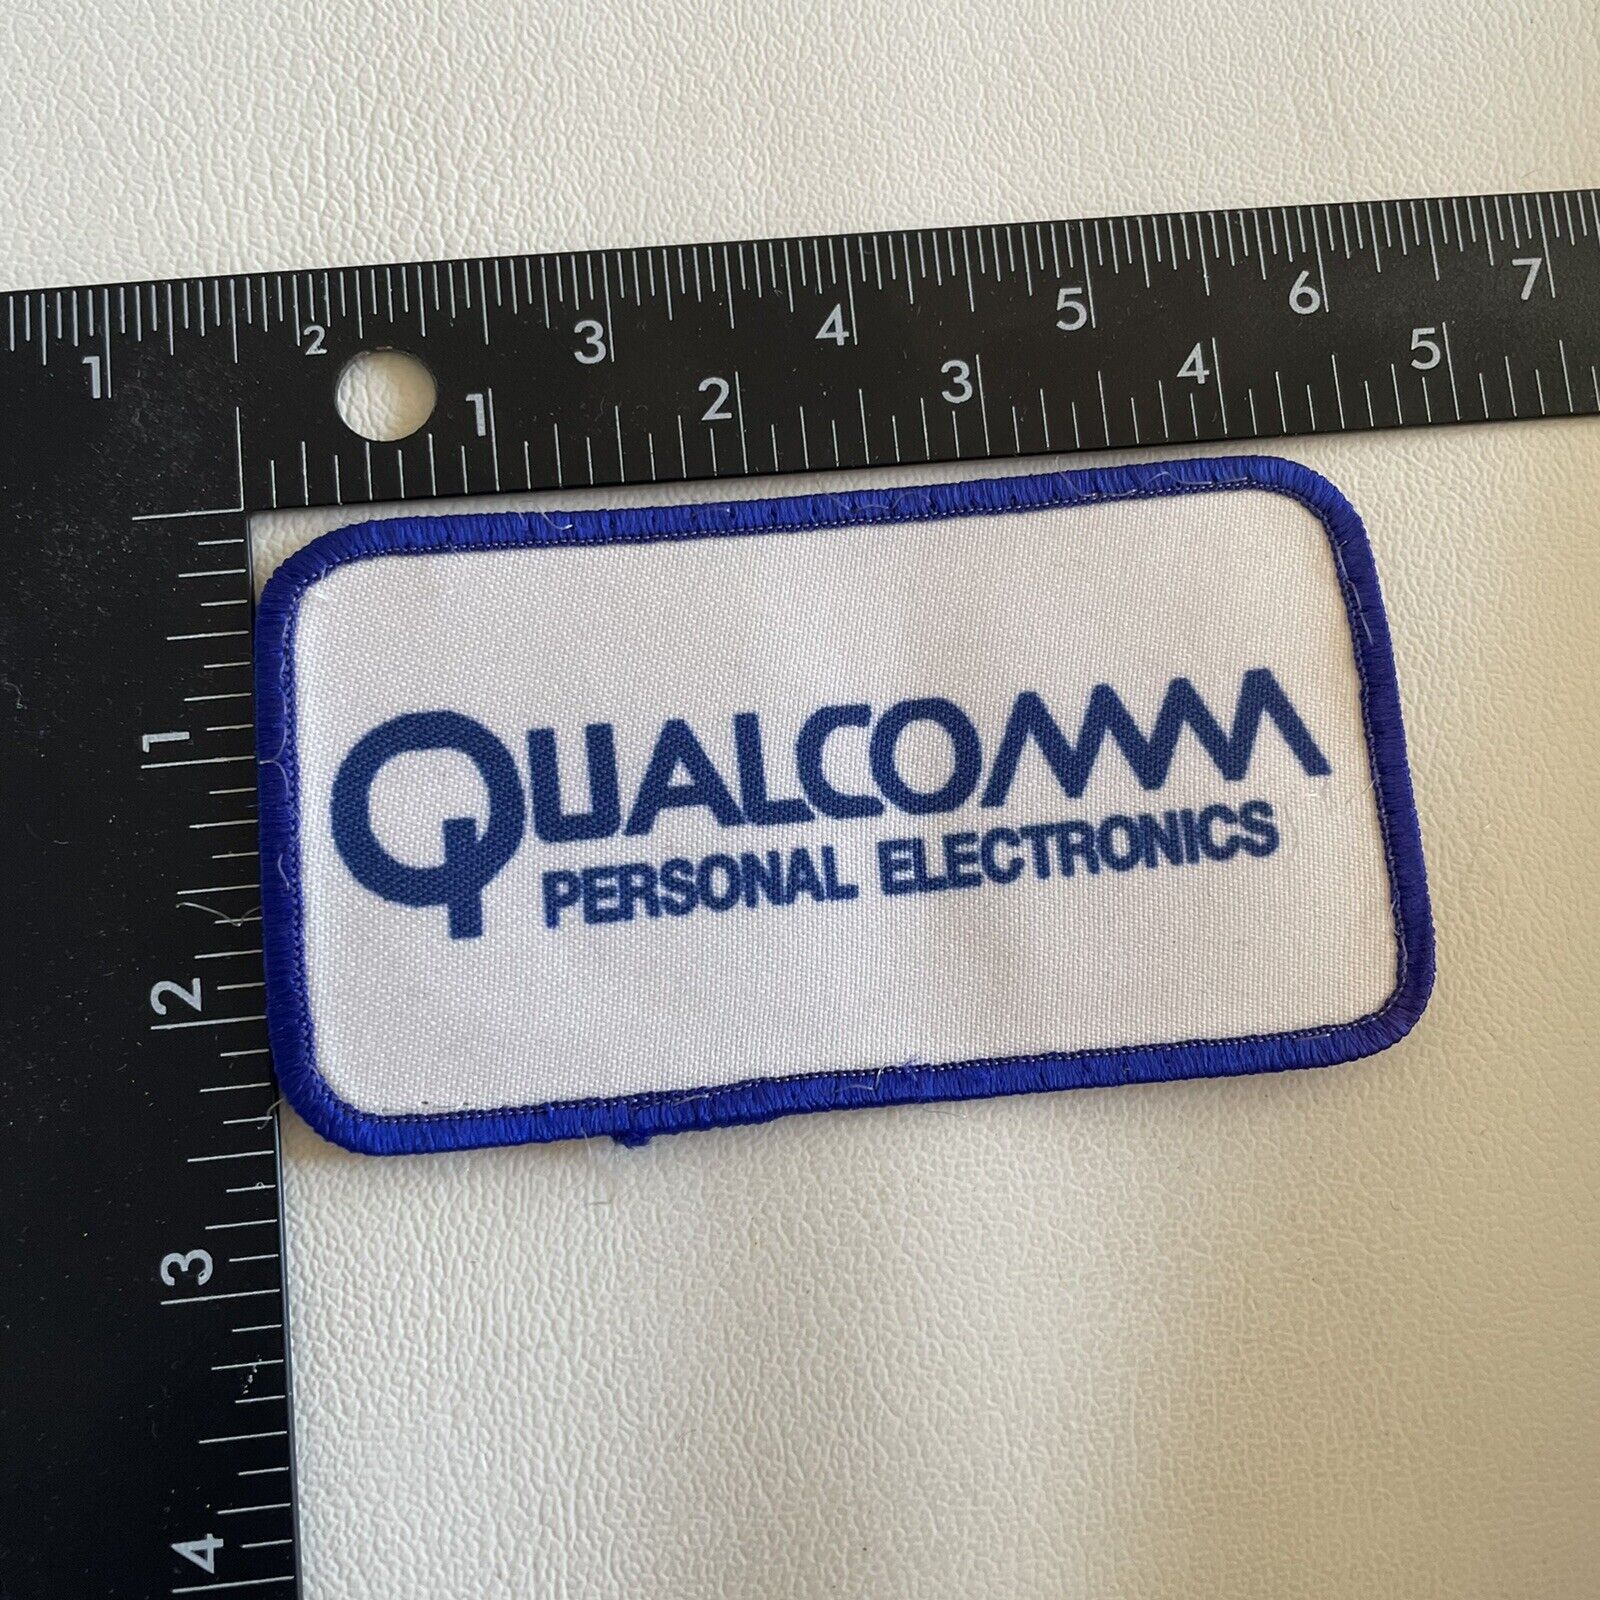 Personal Electronics QUALCOMM Advertising Patch (Semiconductors, Software) 00PS